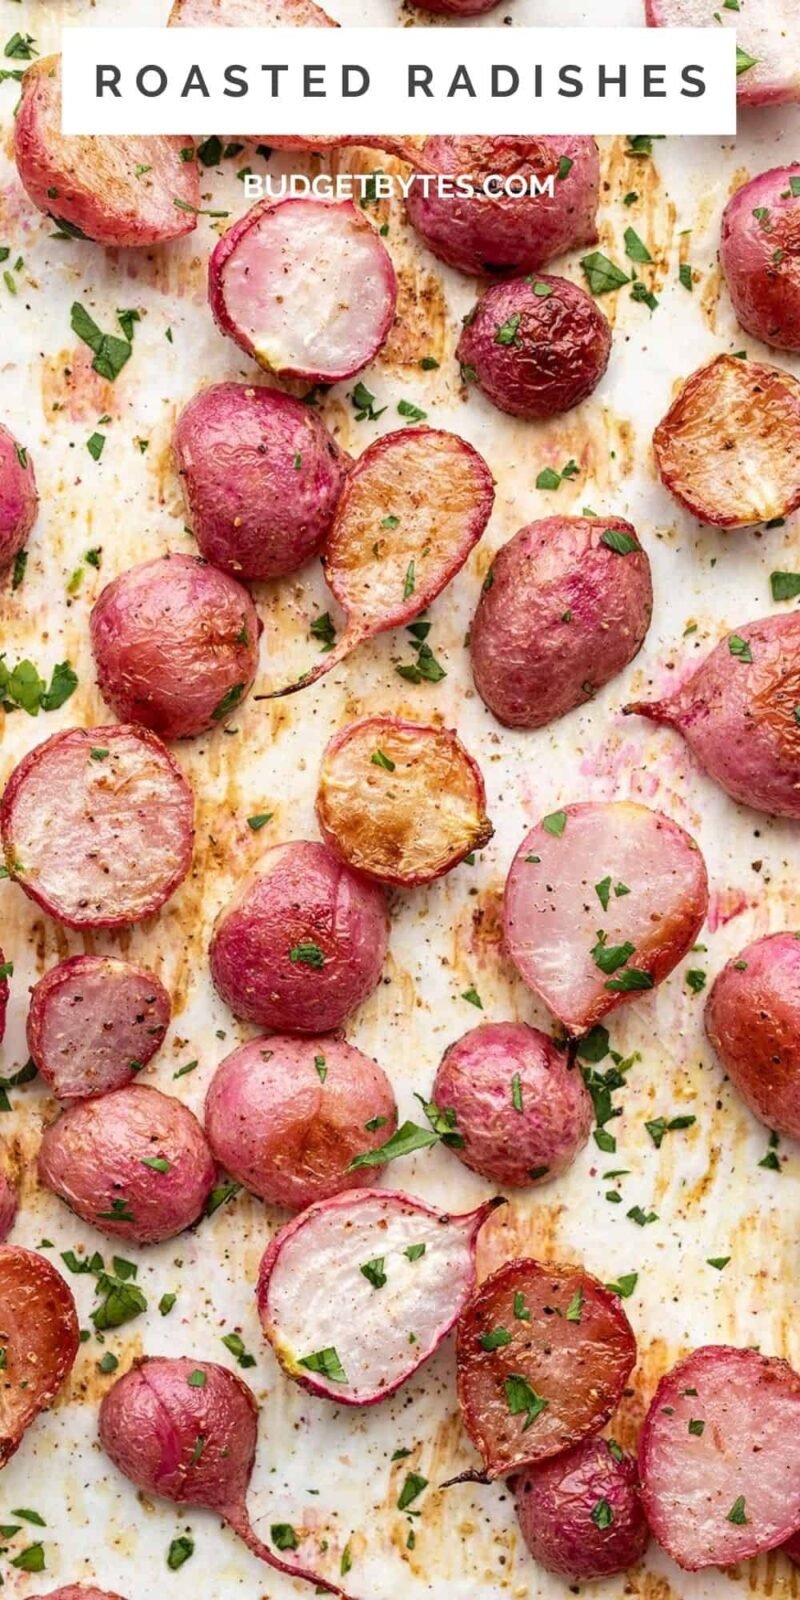 close up overhead view of roasted radishes on a baking sheet, title text at the top.